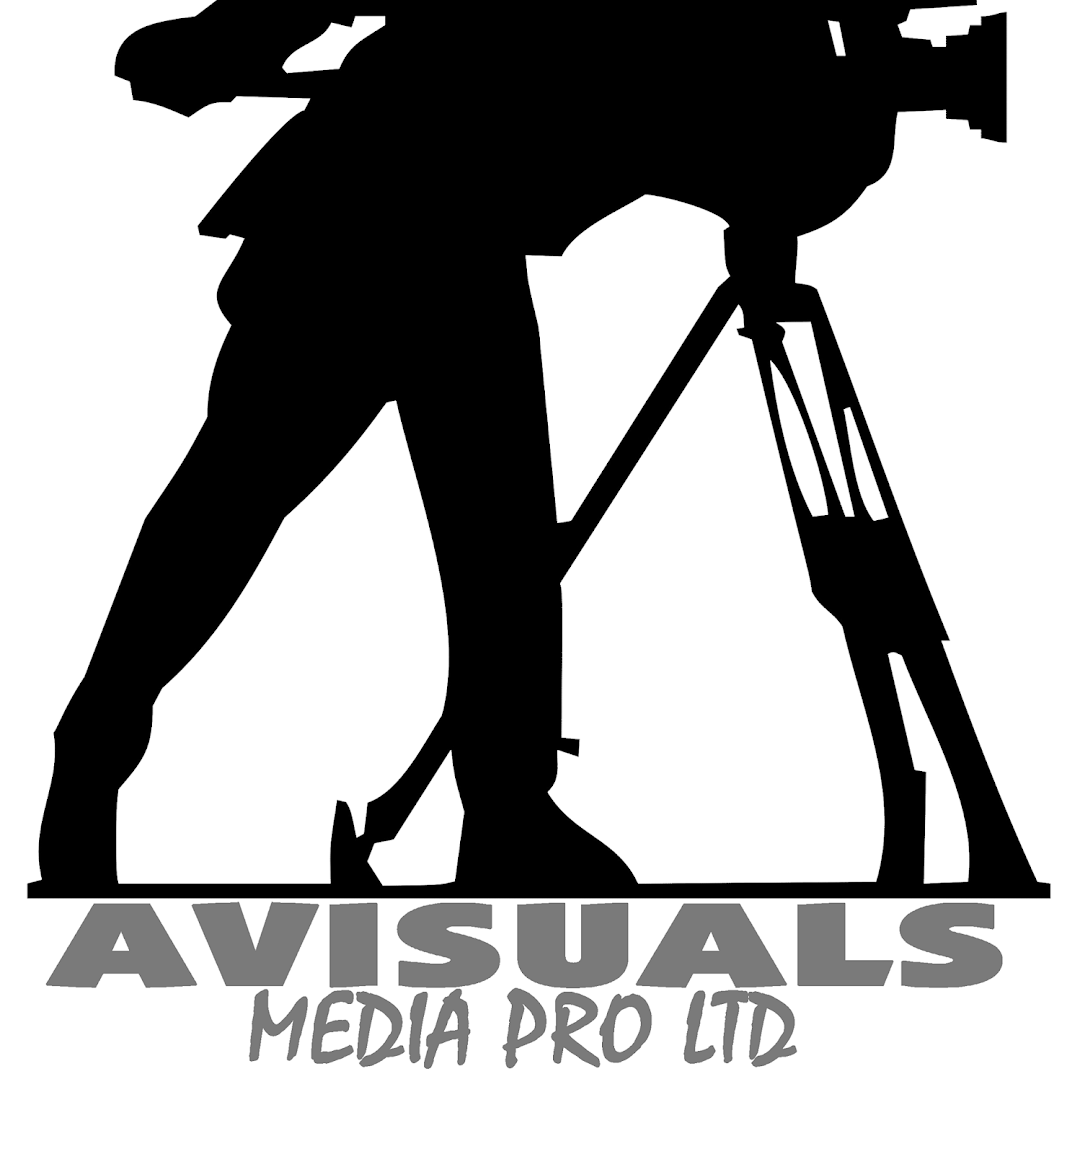 Afevisual production